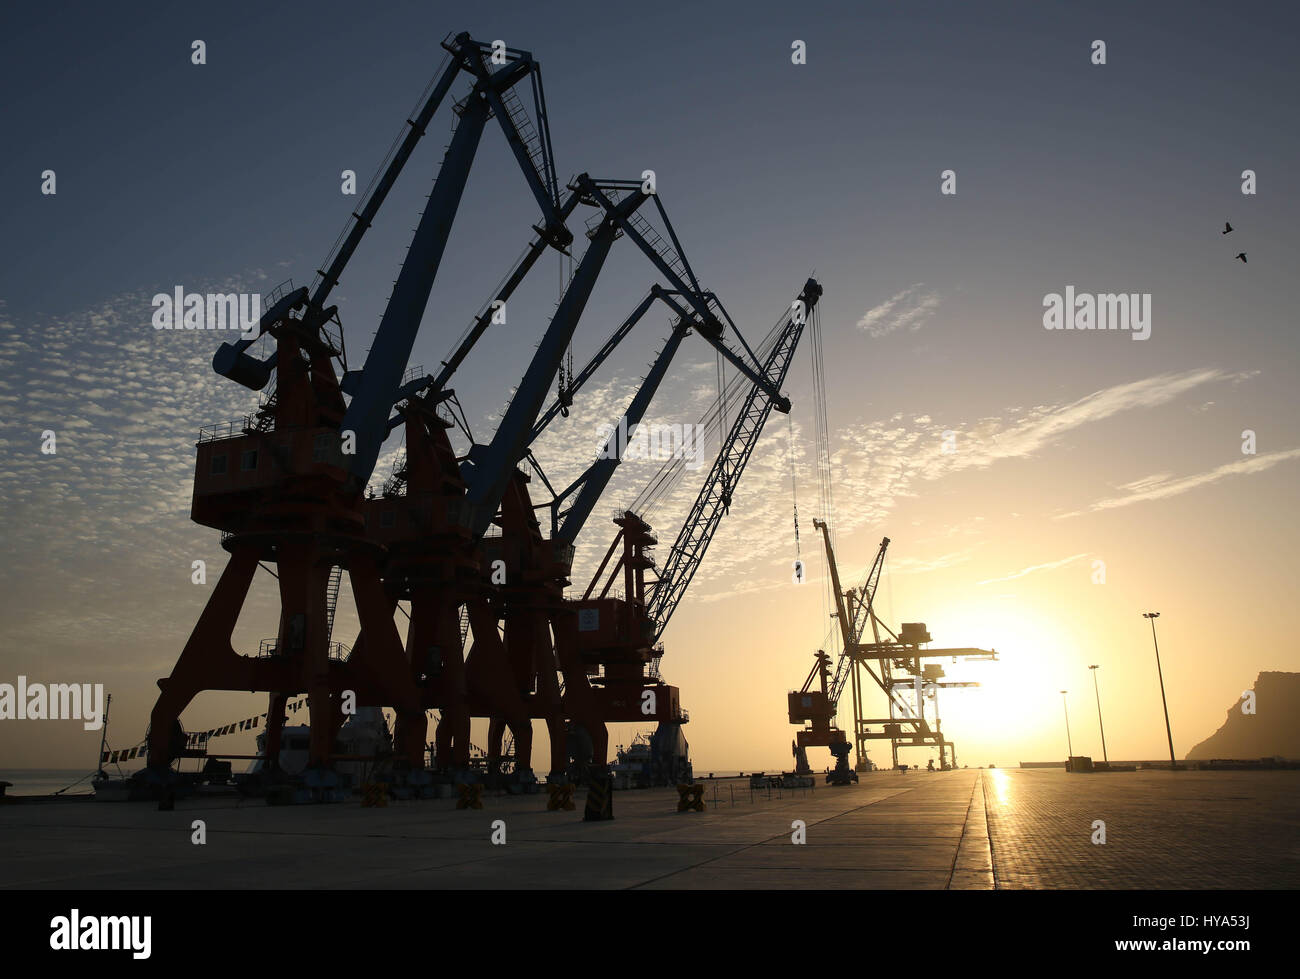 (170403) -- GWADAR(PAKISTAN), April 3, 2017 (Xinhua) -- Photo taken on March 23, 2017 shows the Gwadar port area at sunrise in Gwadar, Pakistan. Gwadar, a poorly-known port town previously in Pakistan has been becoming a new economic engine for the country with the construction of a free zone co-built with China. (Xinhua/Liu Tian) (sxk) Stock Photo